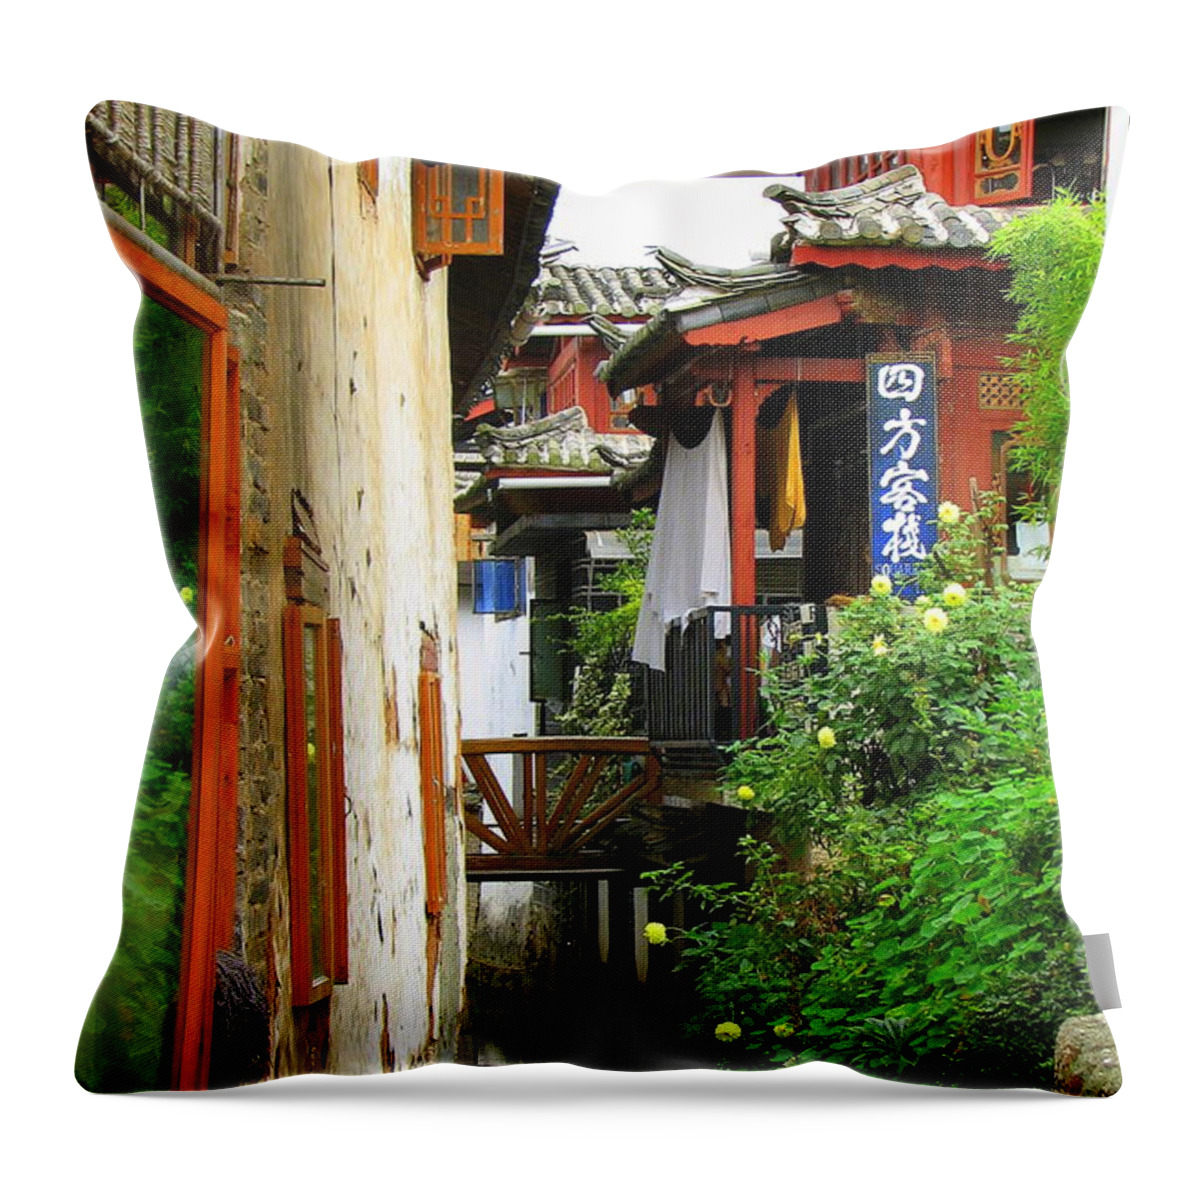 Lijiang Throw Pillow featuring the photograph Lijiang Back Canal by Carla Parris